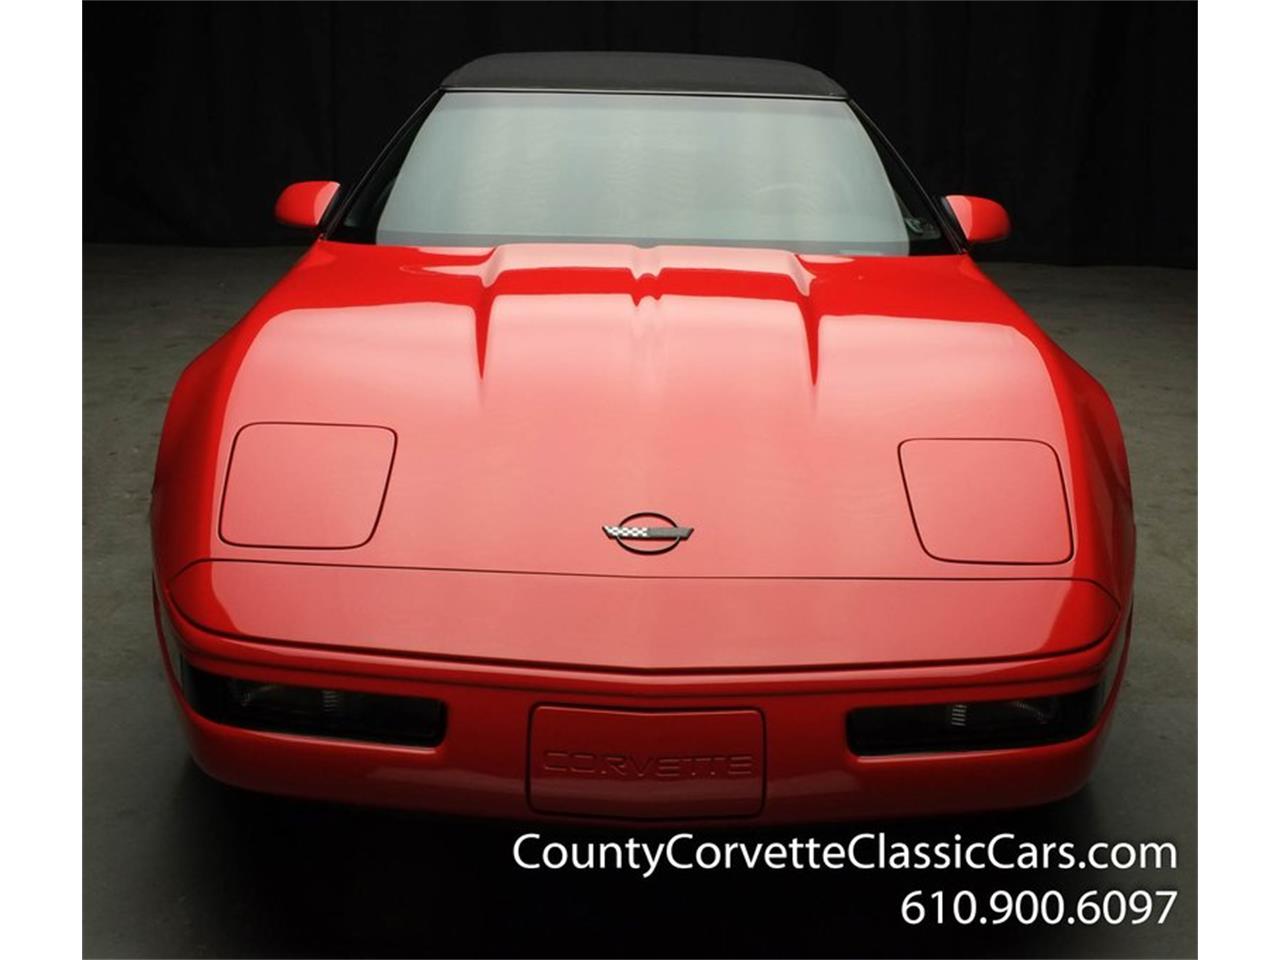 1994 Chevrolet Corvette for sale in West Chester, PA